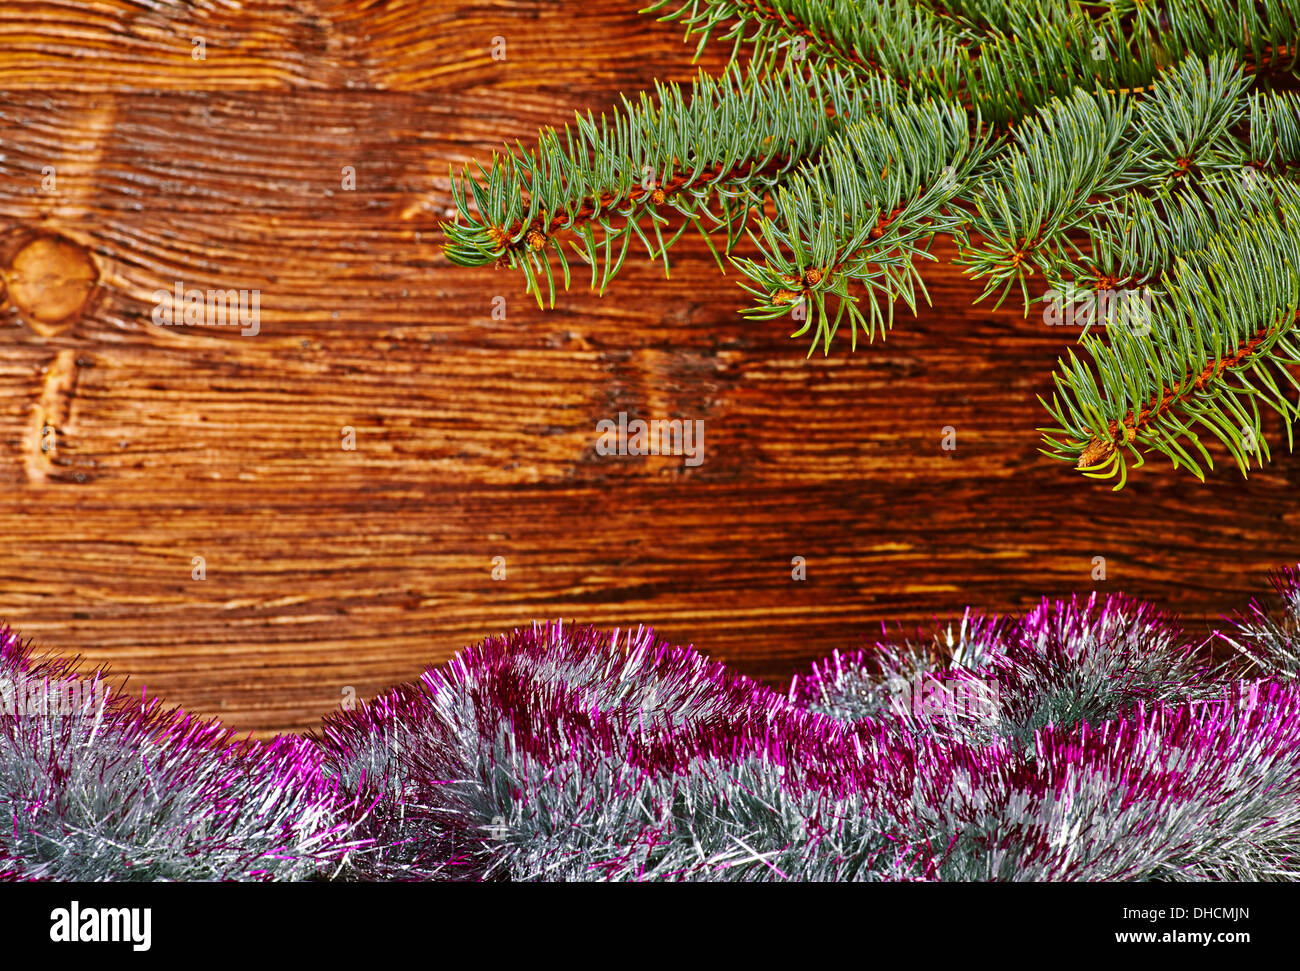 Christmas decoration. Fir-tree, tinsel and wooden background. Selective focus Stock Photo